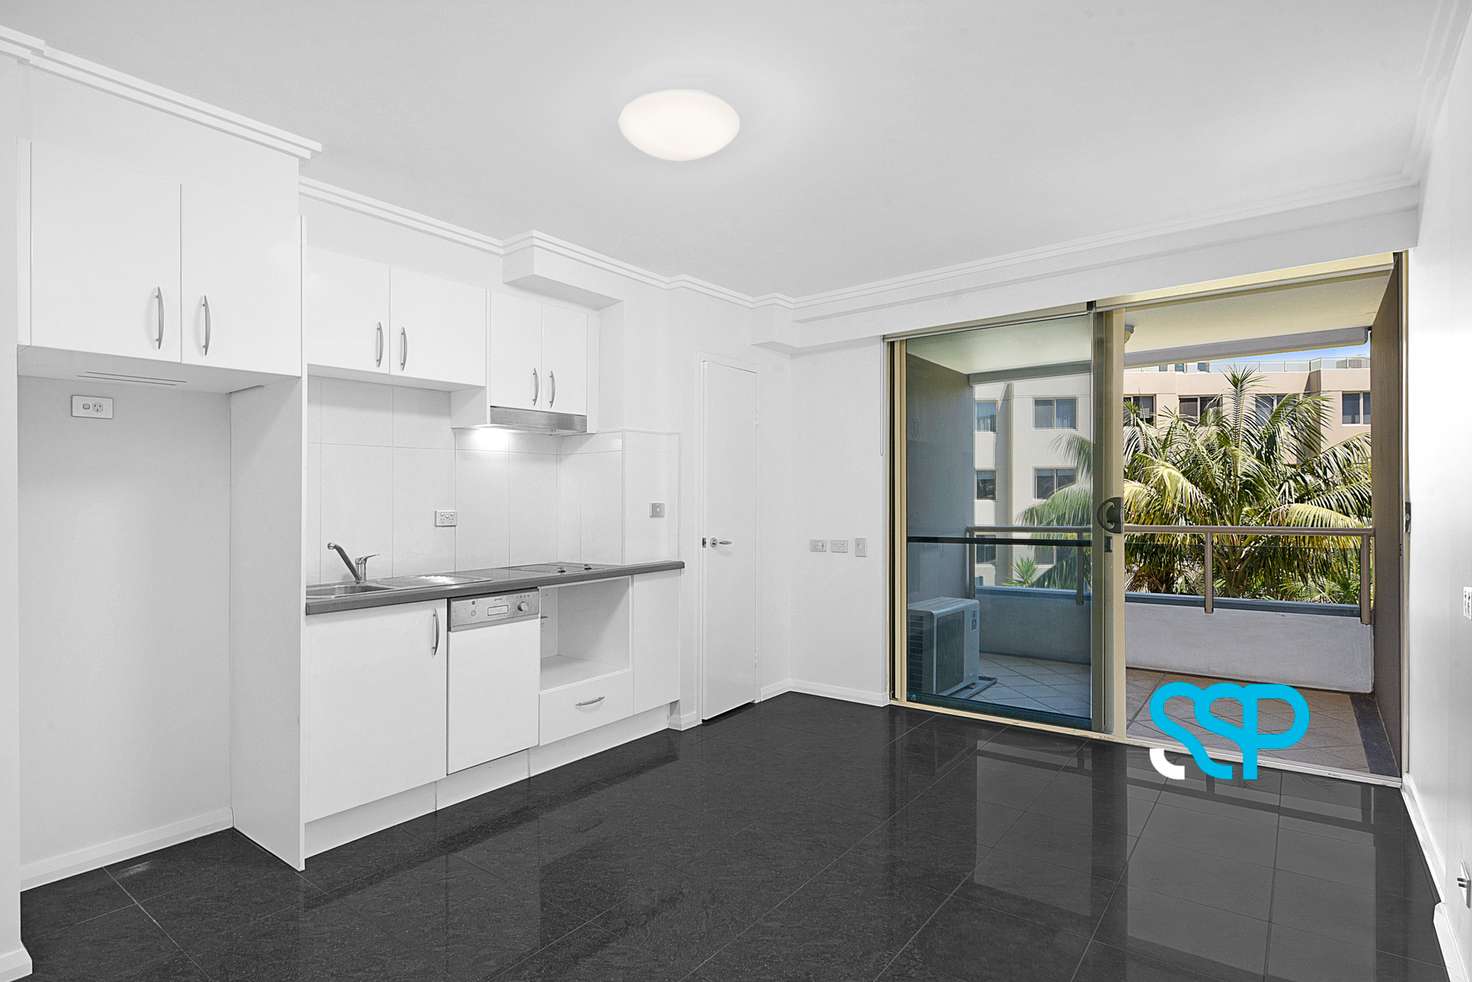 Main view of Homely apartment listing, 360 Kingsway, Caringbah NSW 2229